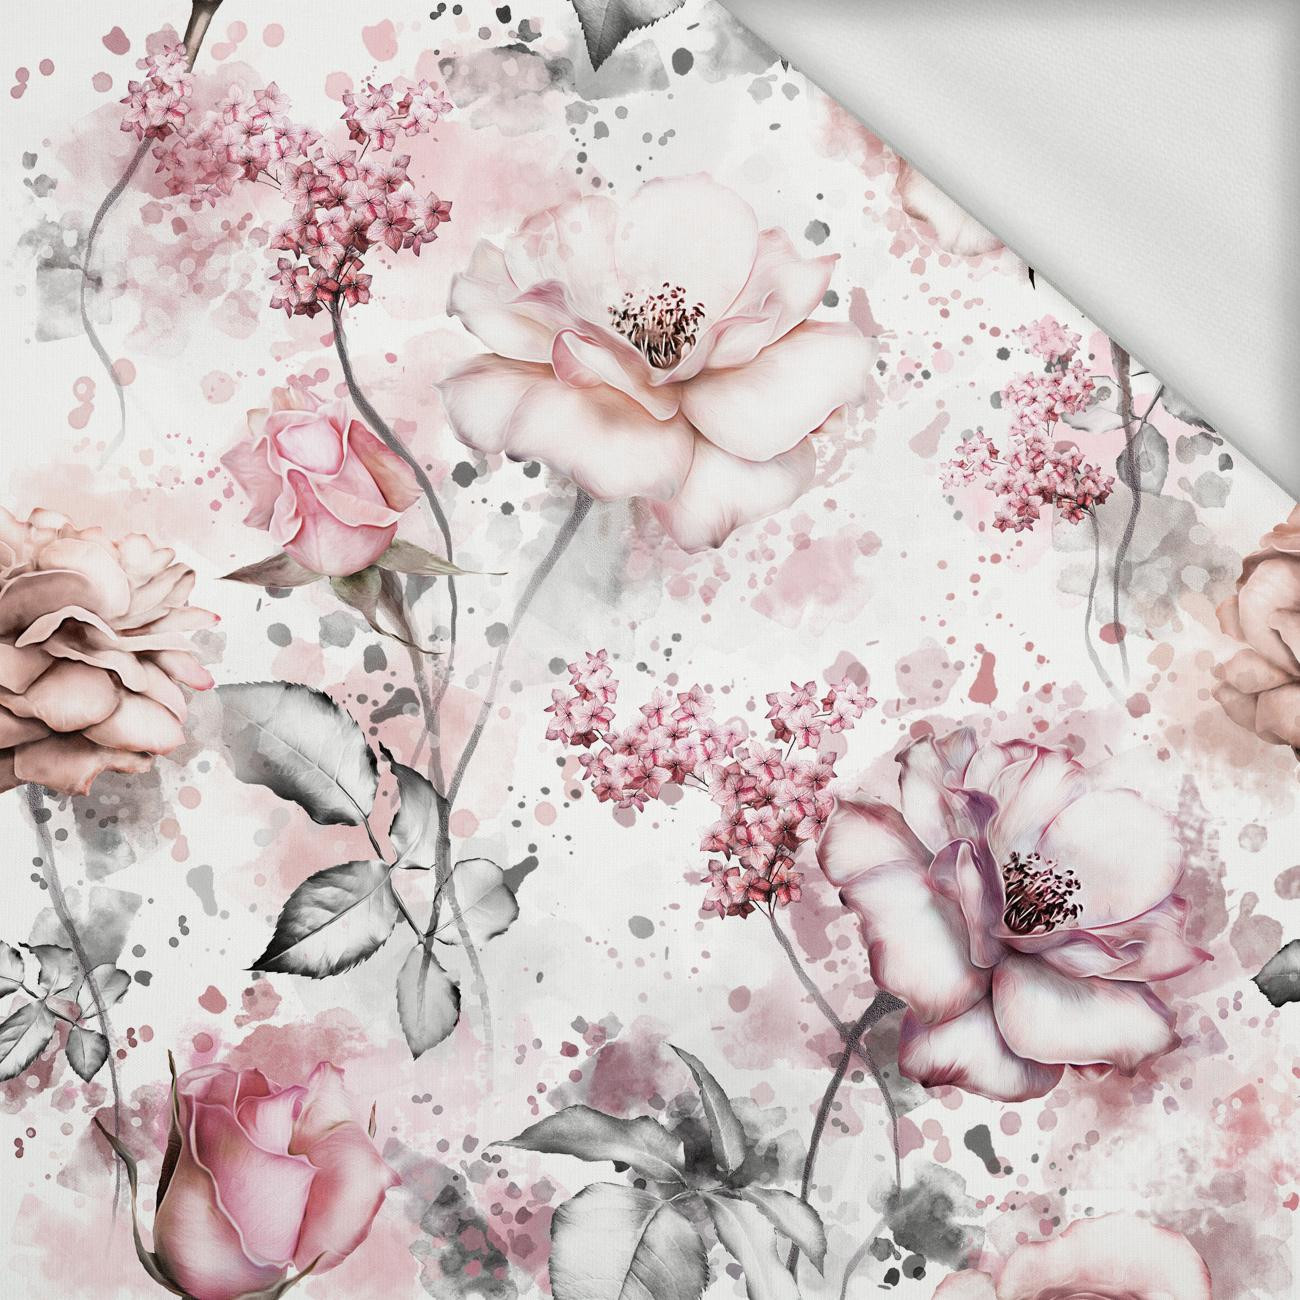 FLOWERS wz.9 - looped knit fabric